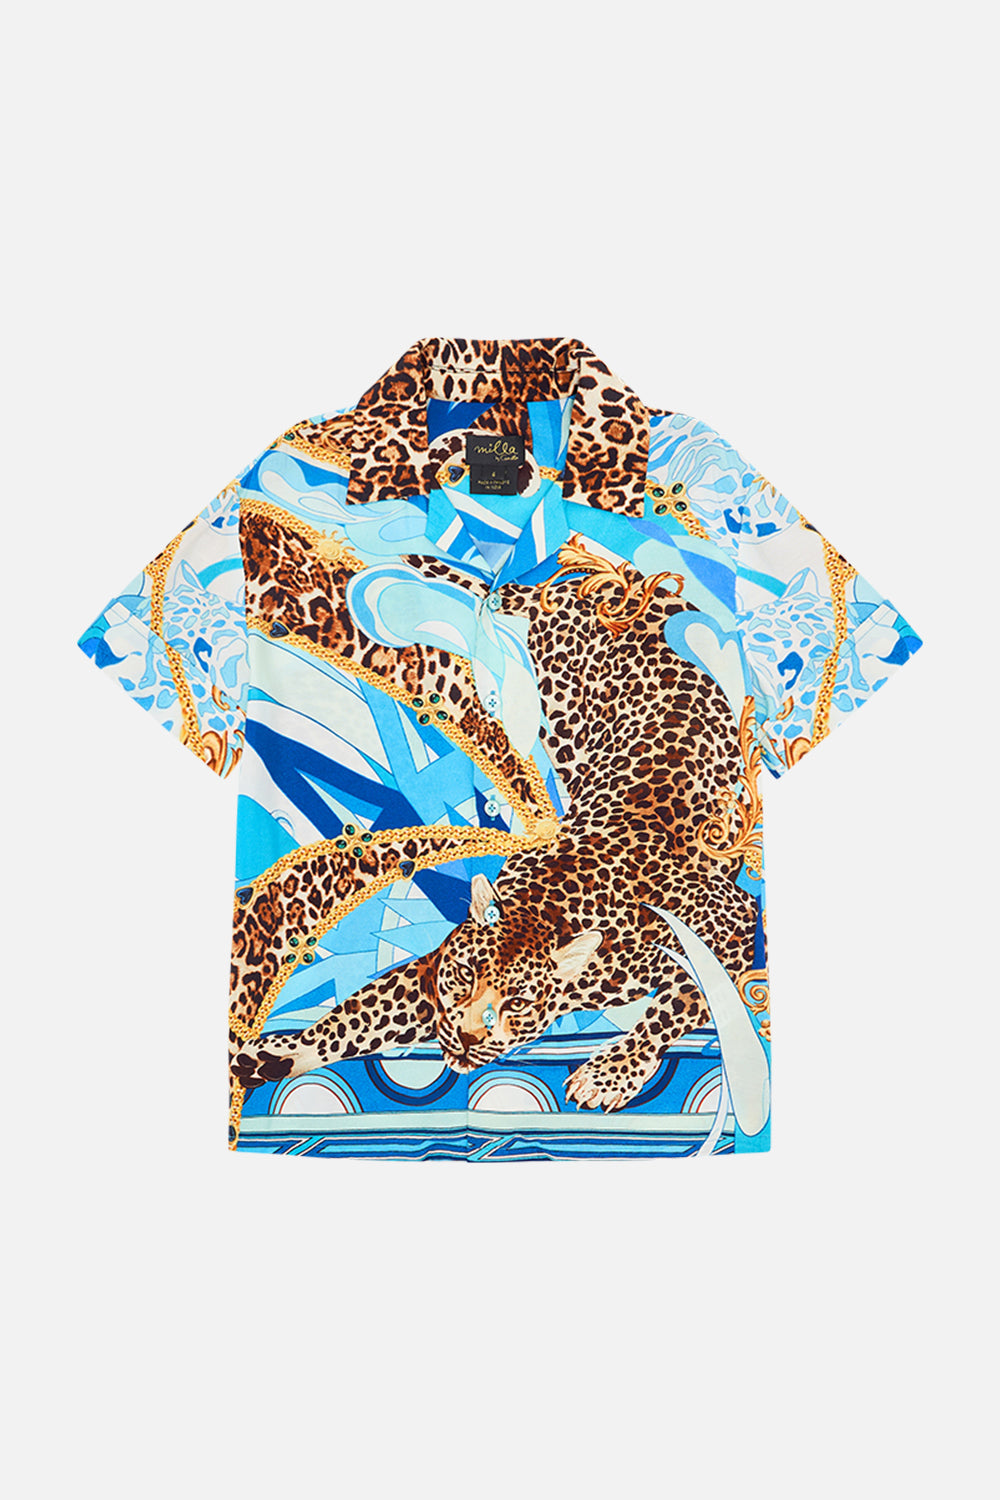 Product view of Milla By CAMILLA boys shirt in Sky Cheetah print 